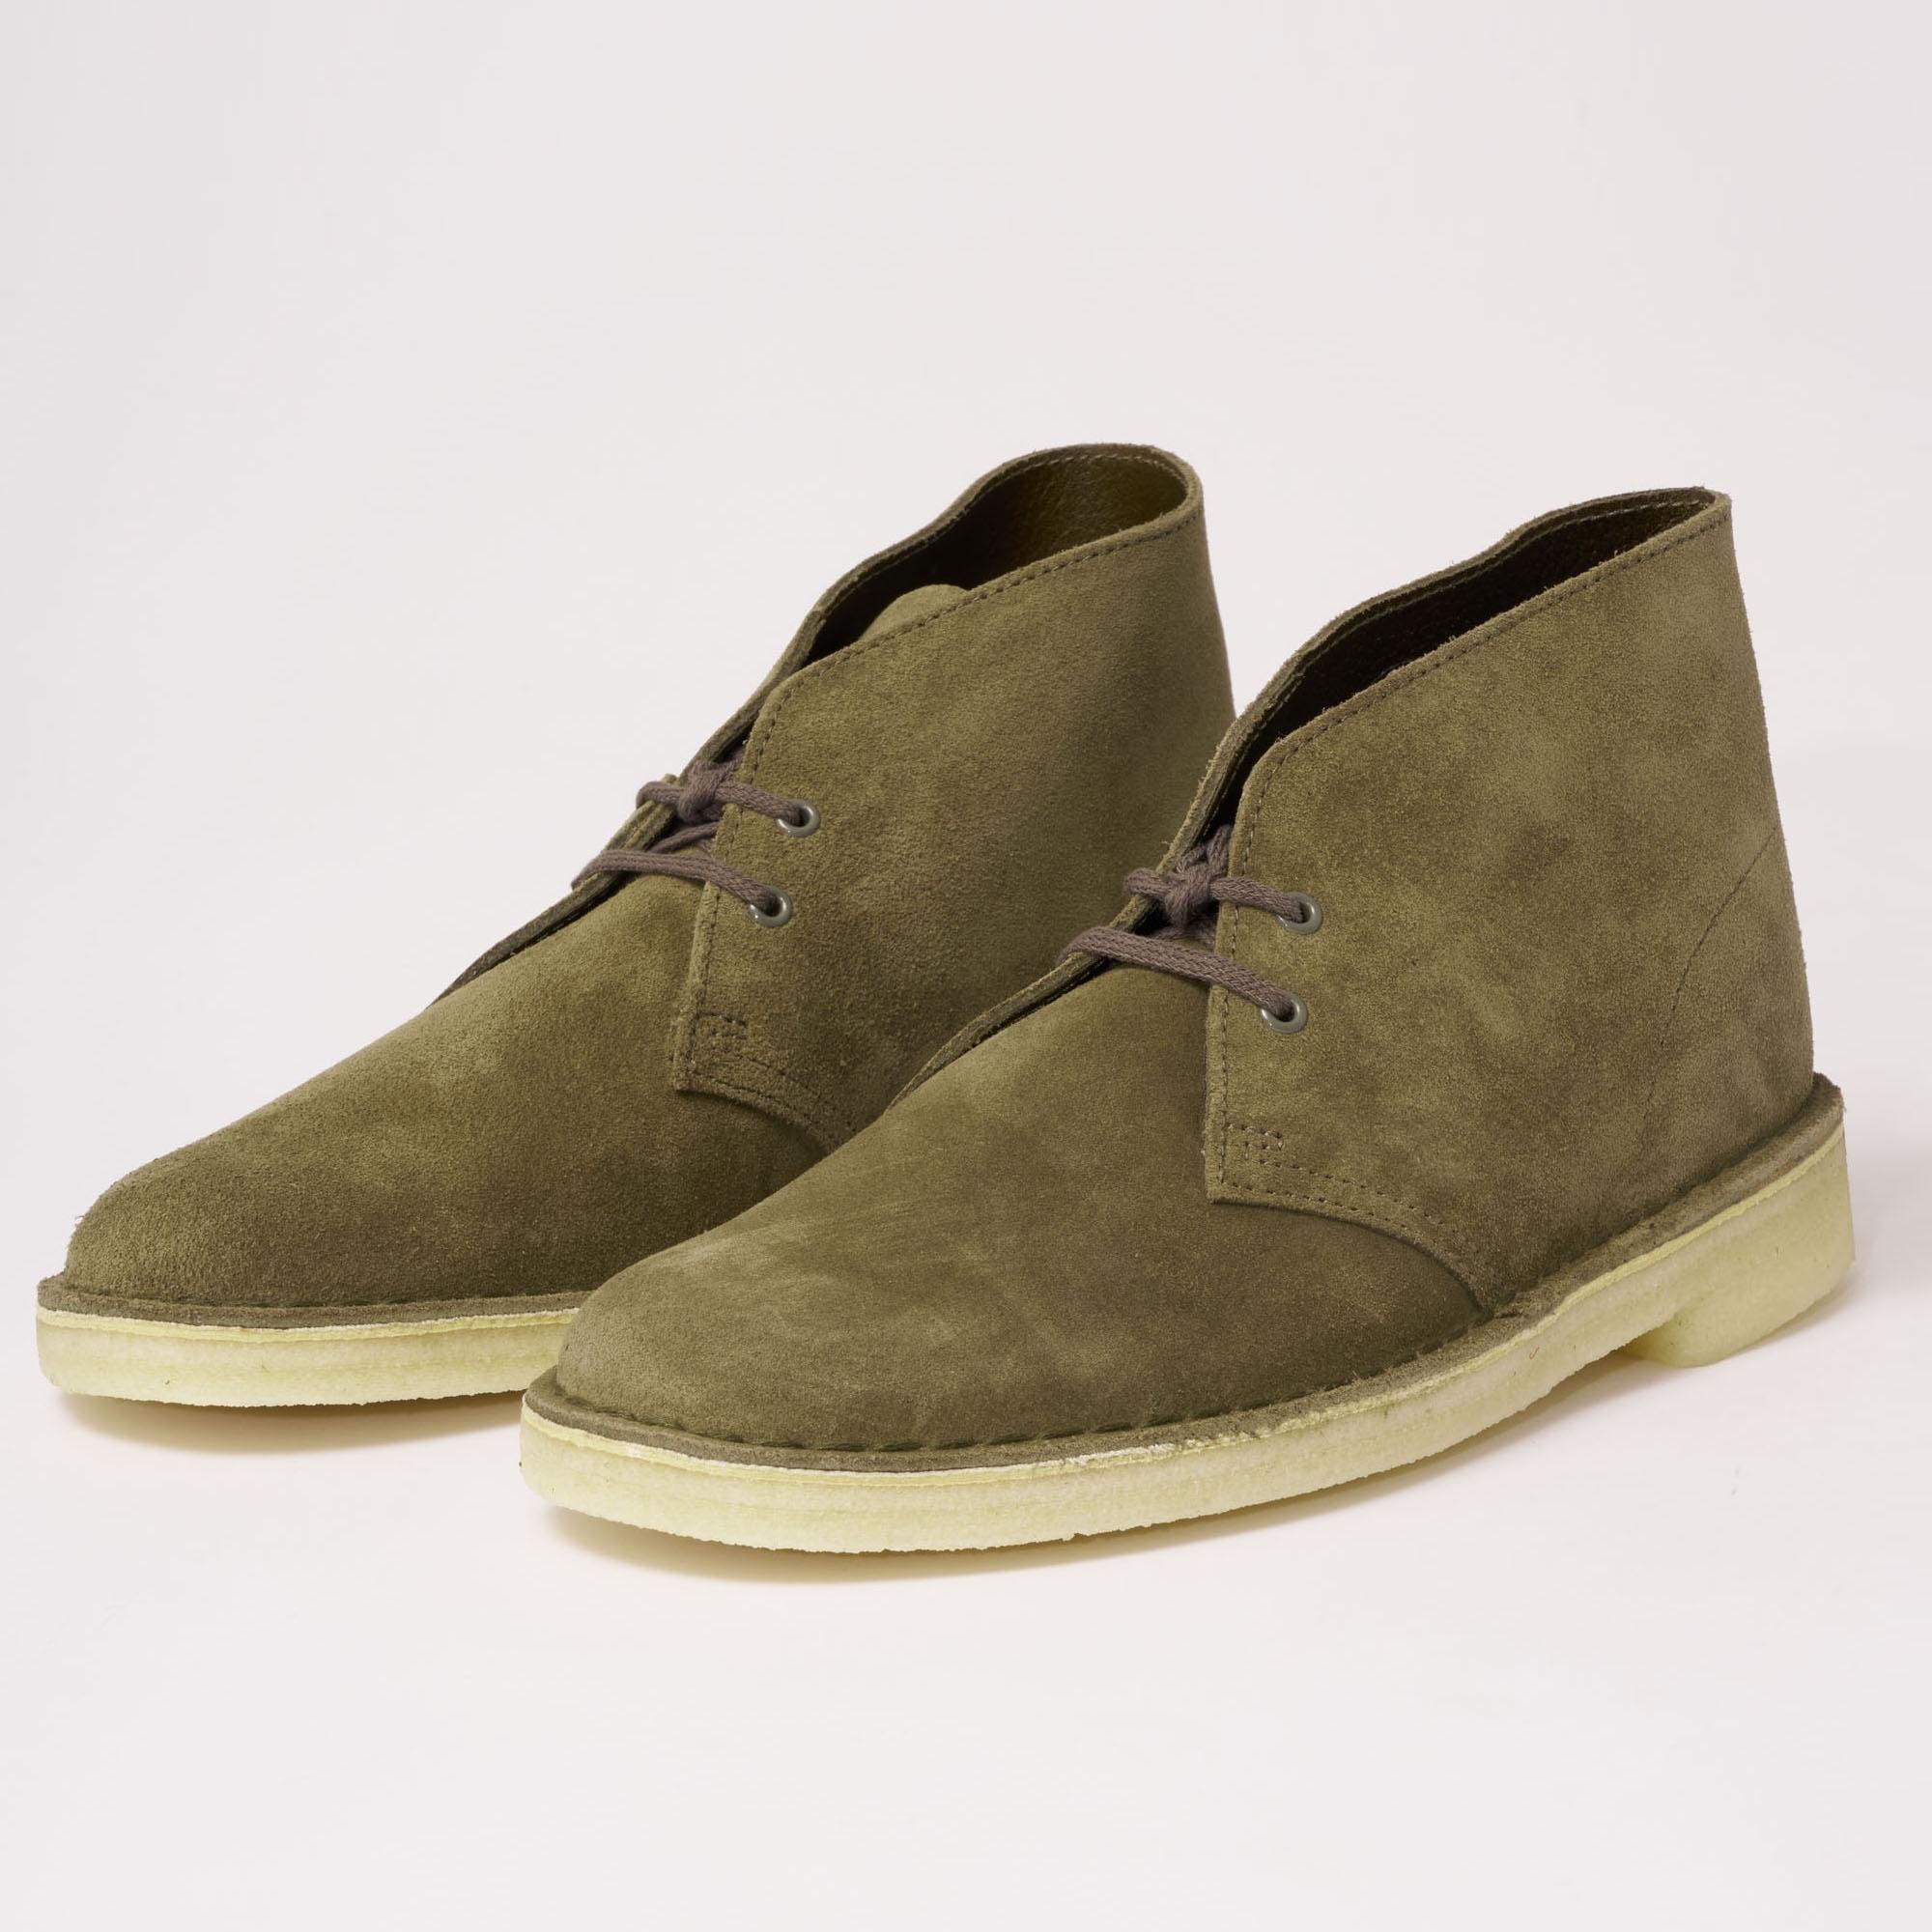 Clarks Suede Desert Boots in Olive 